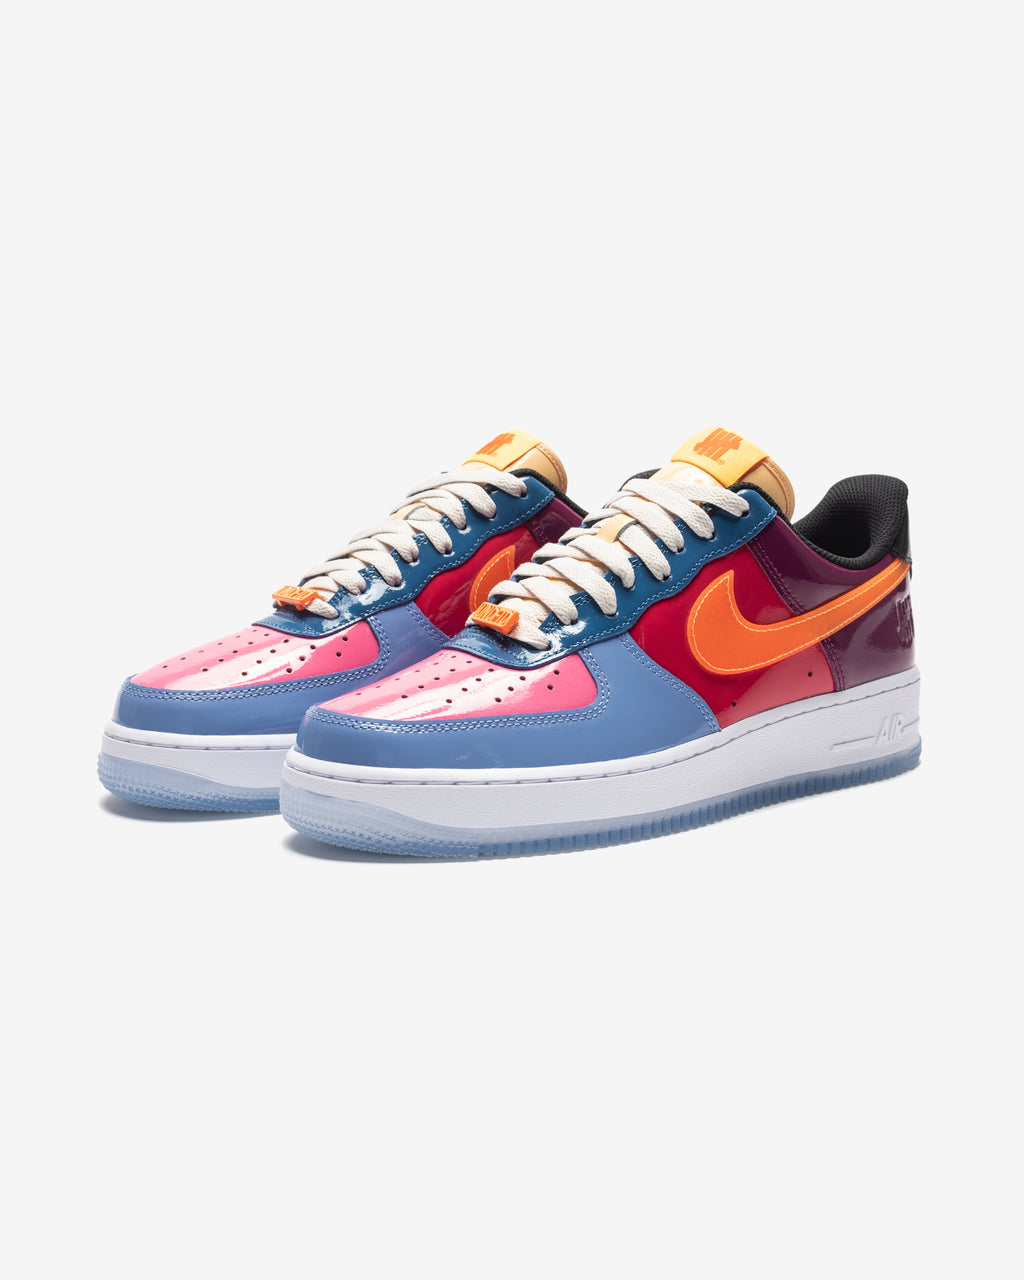 UNDEFEATED x NIKE AIR FORCE 1 LOW SP – Undefeated